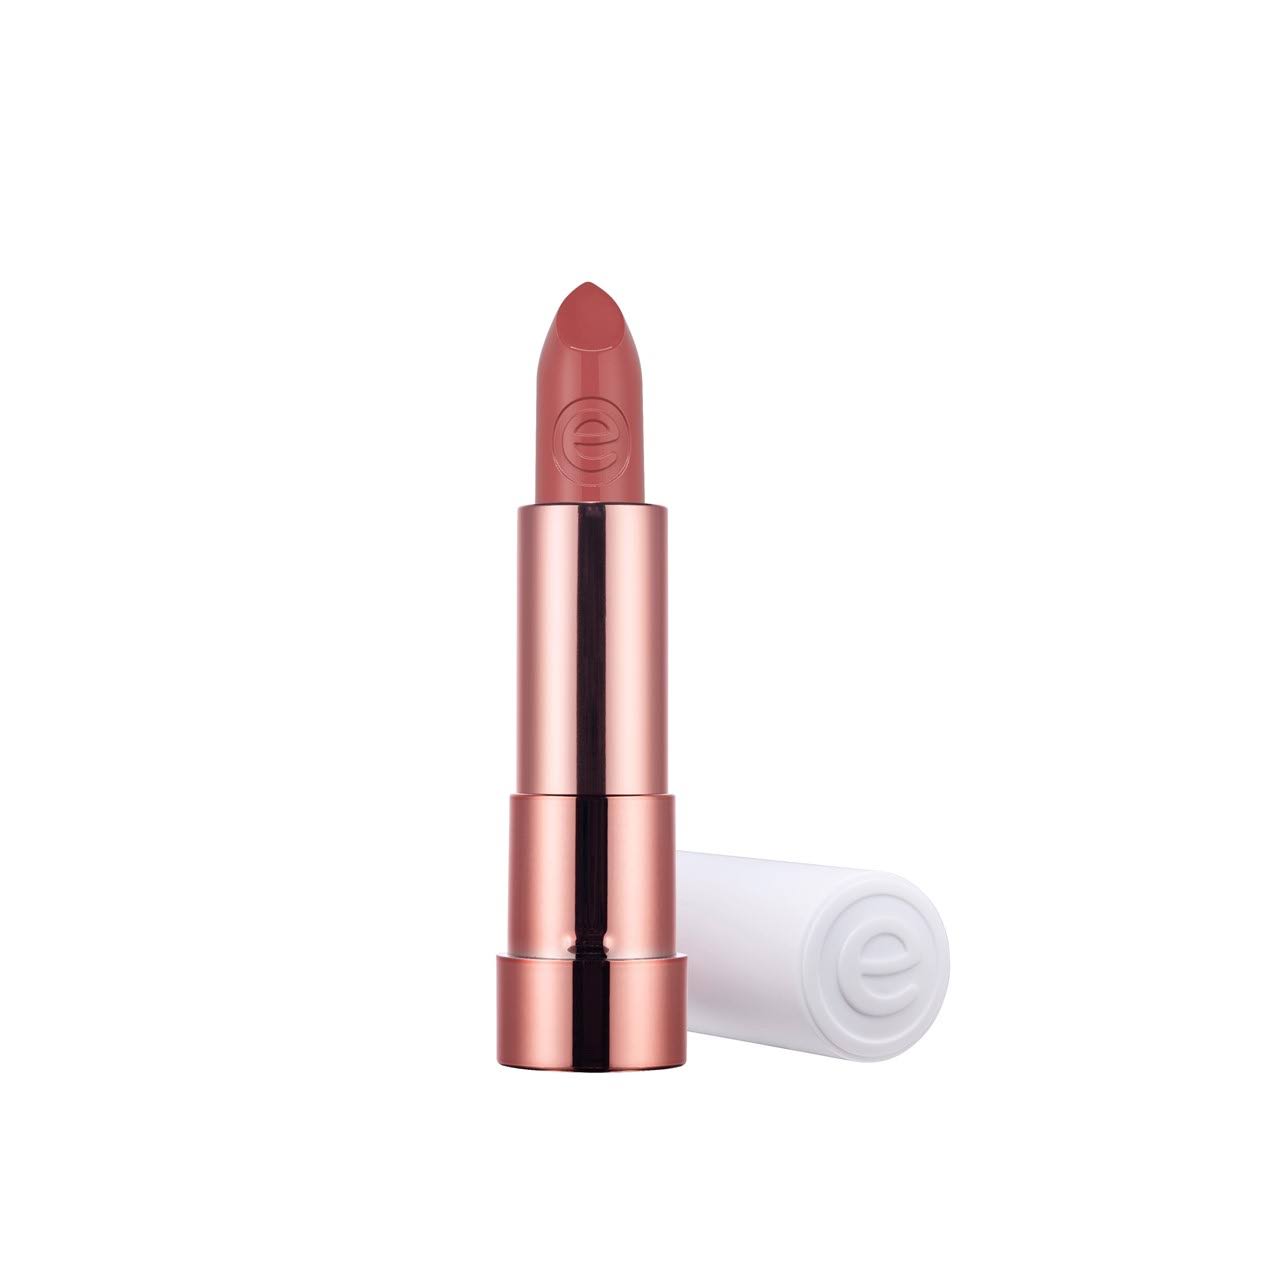 Essence This is Me Lipstick - 03 Bold, 3.5g